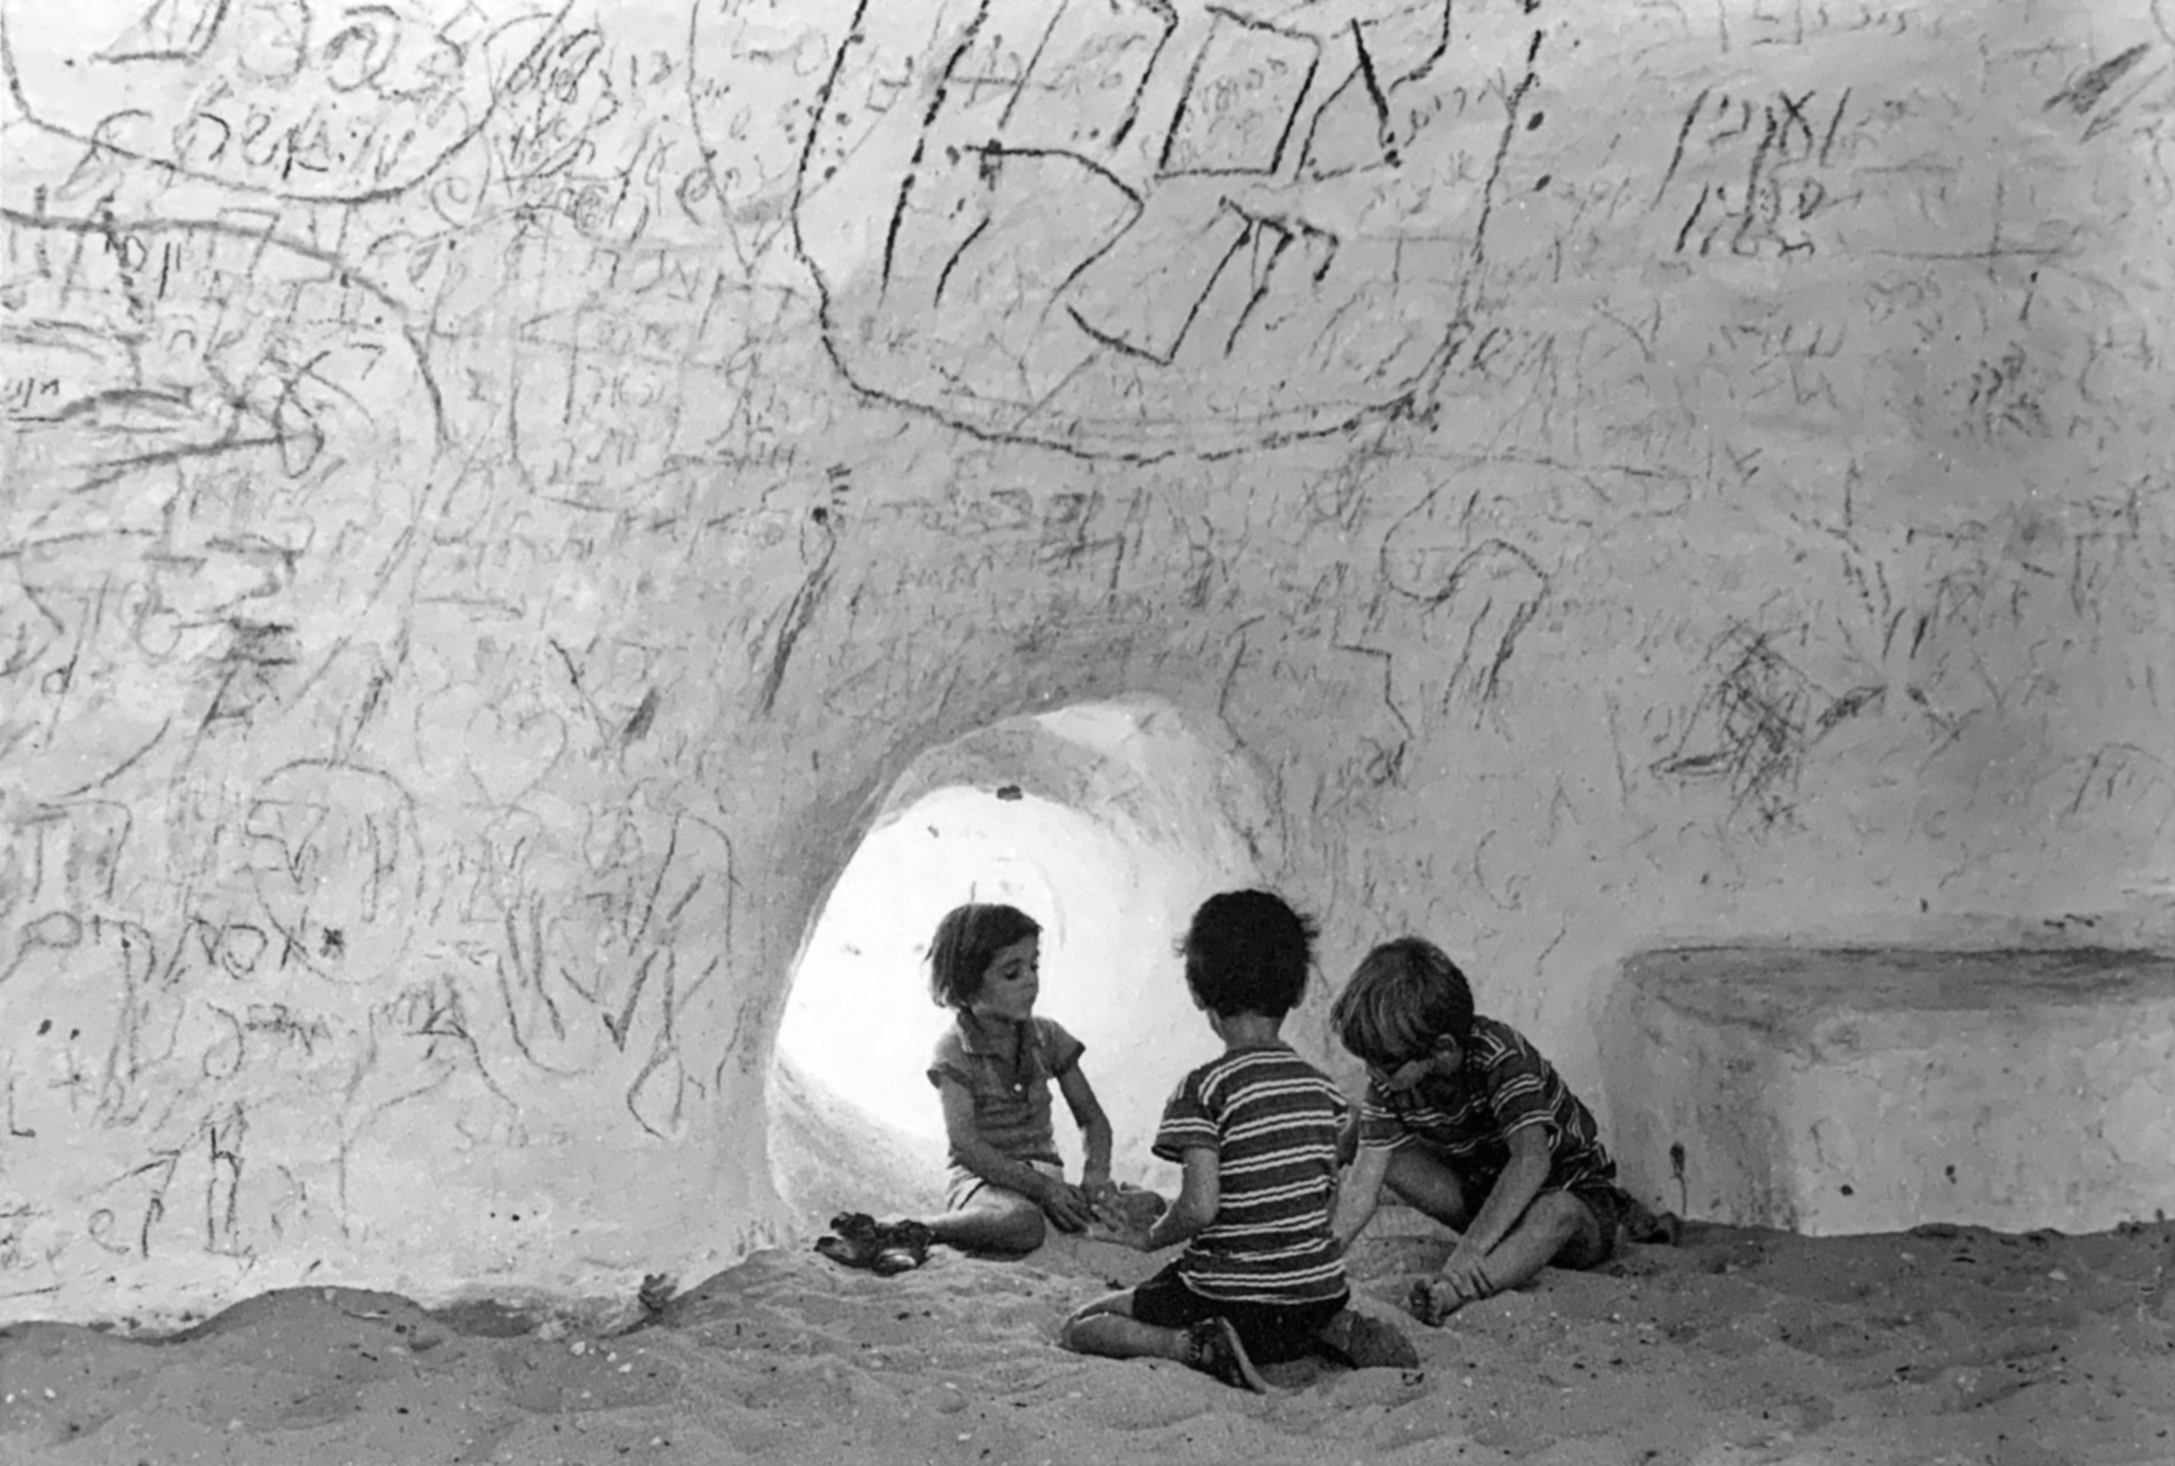 children playing on the inside of the Golem sculpture in the sand